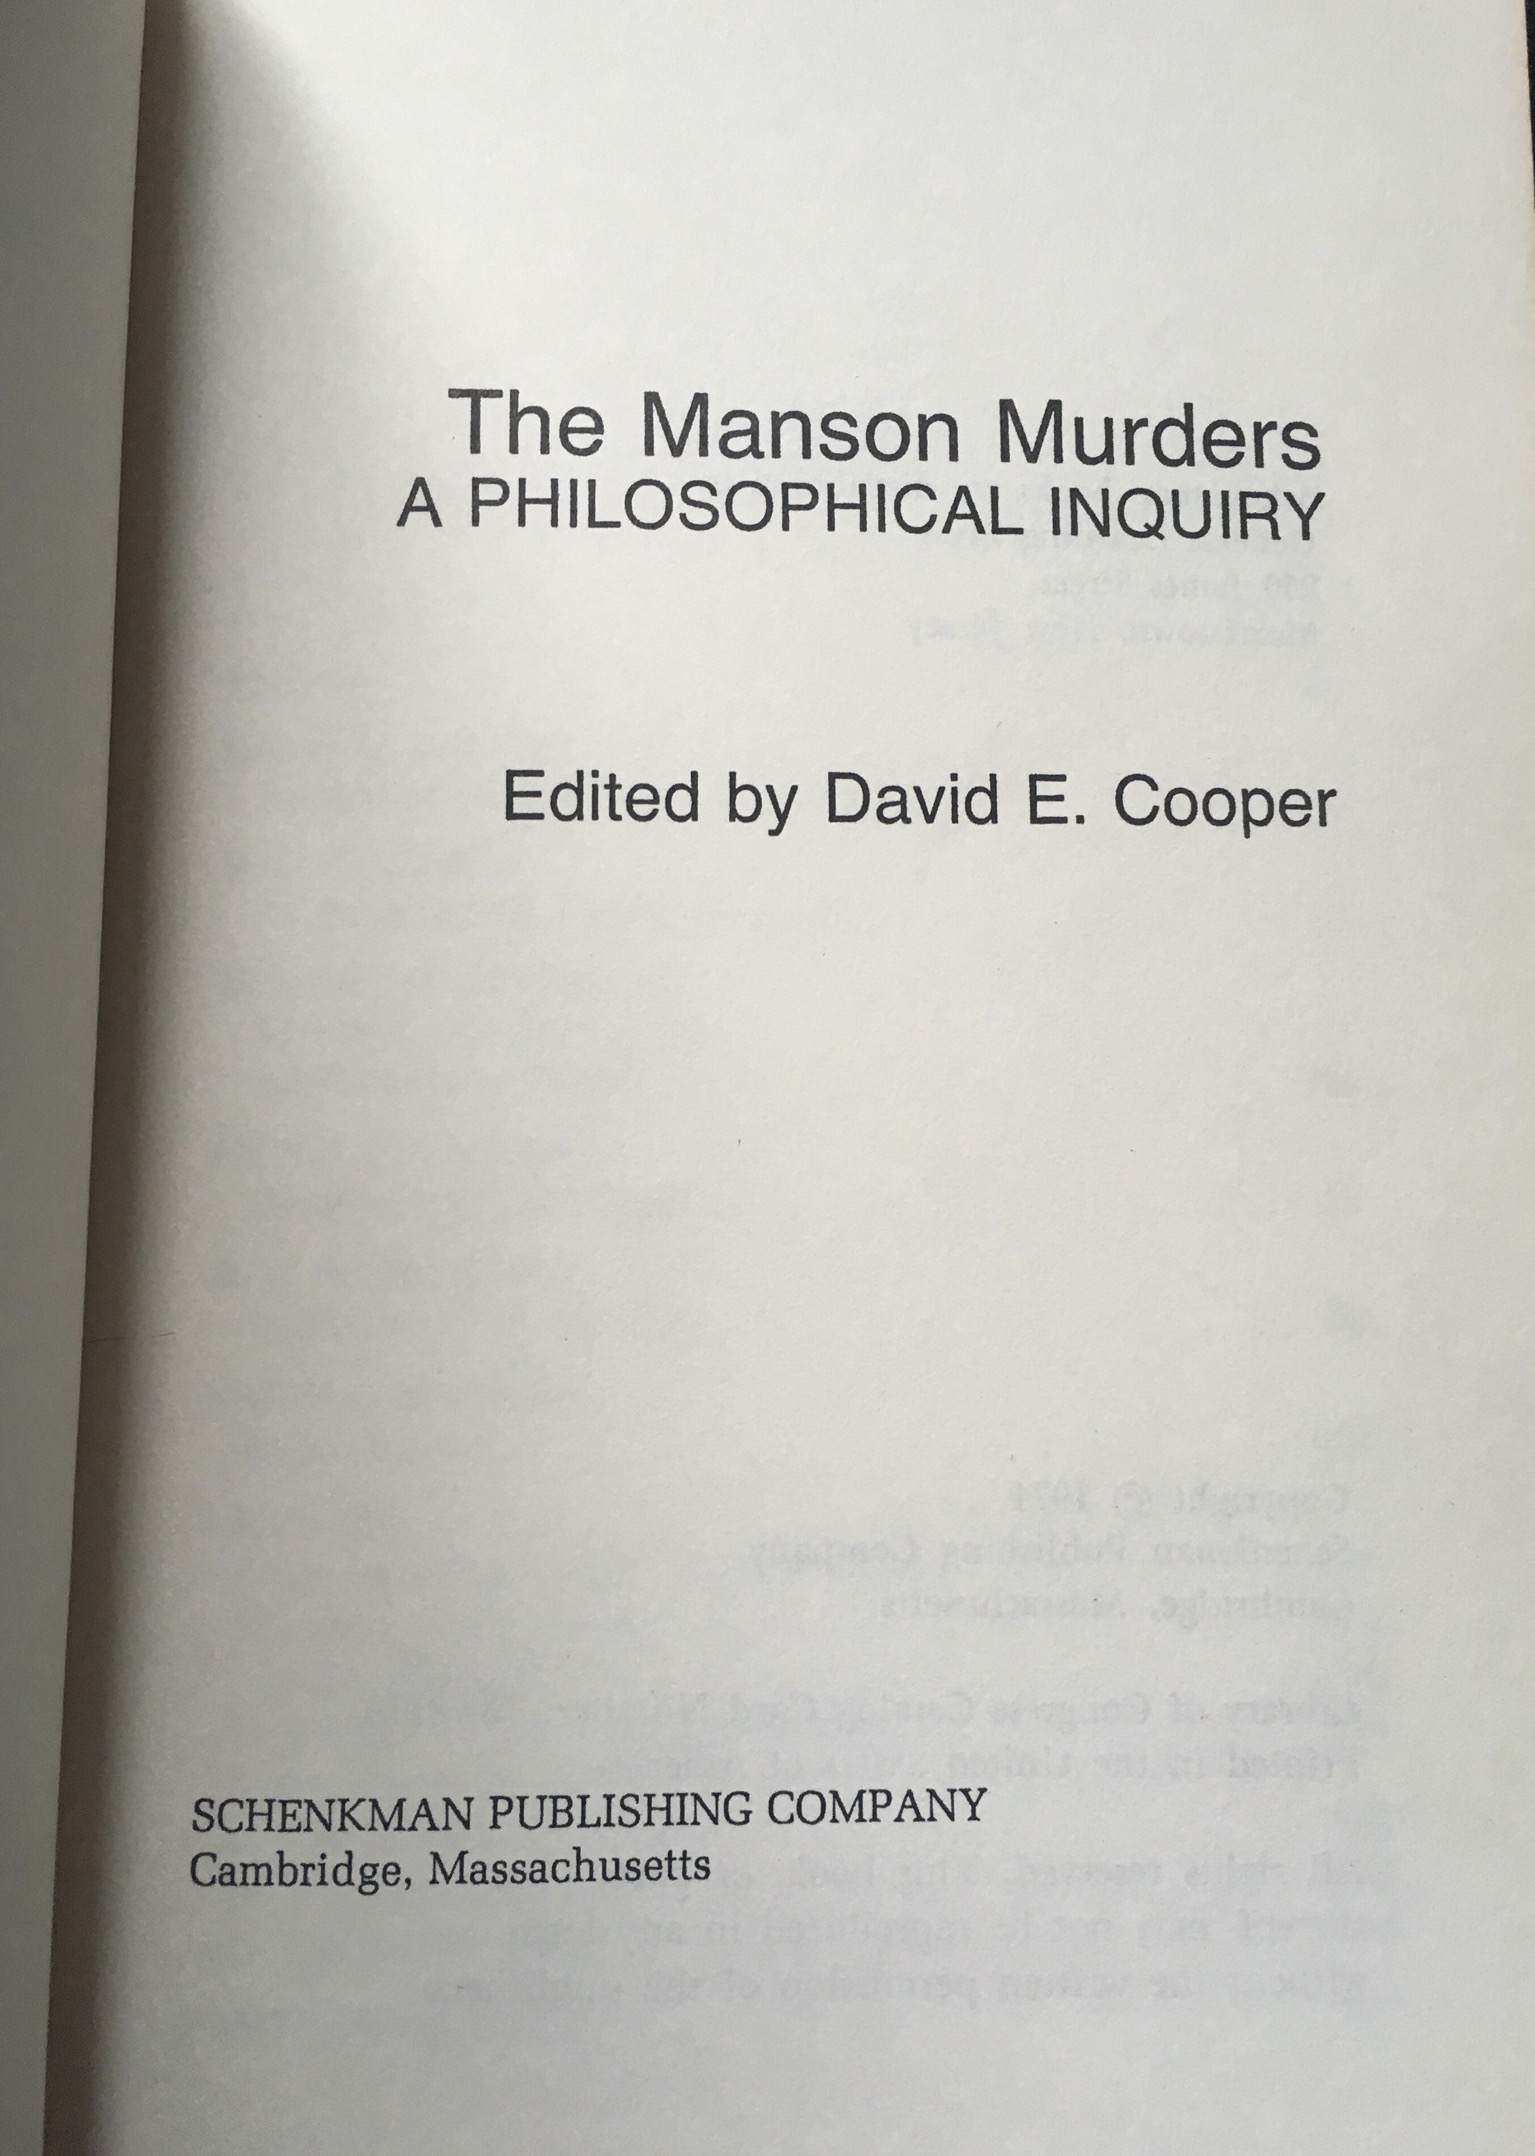 The Manson Murders A Philosophical Inquiry by David E. Cooper